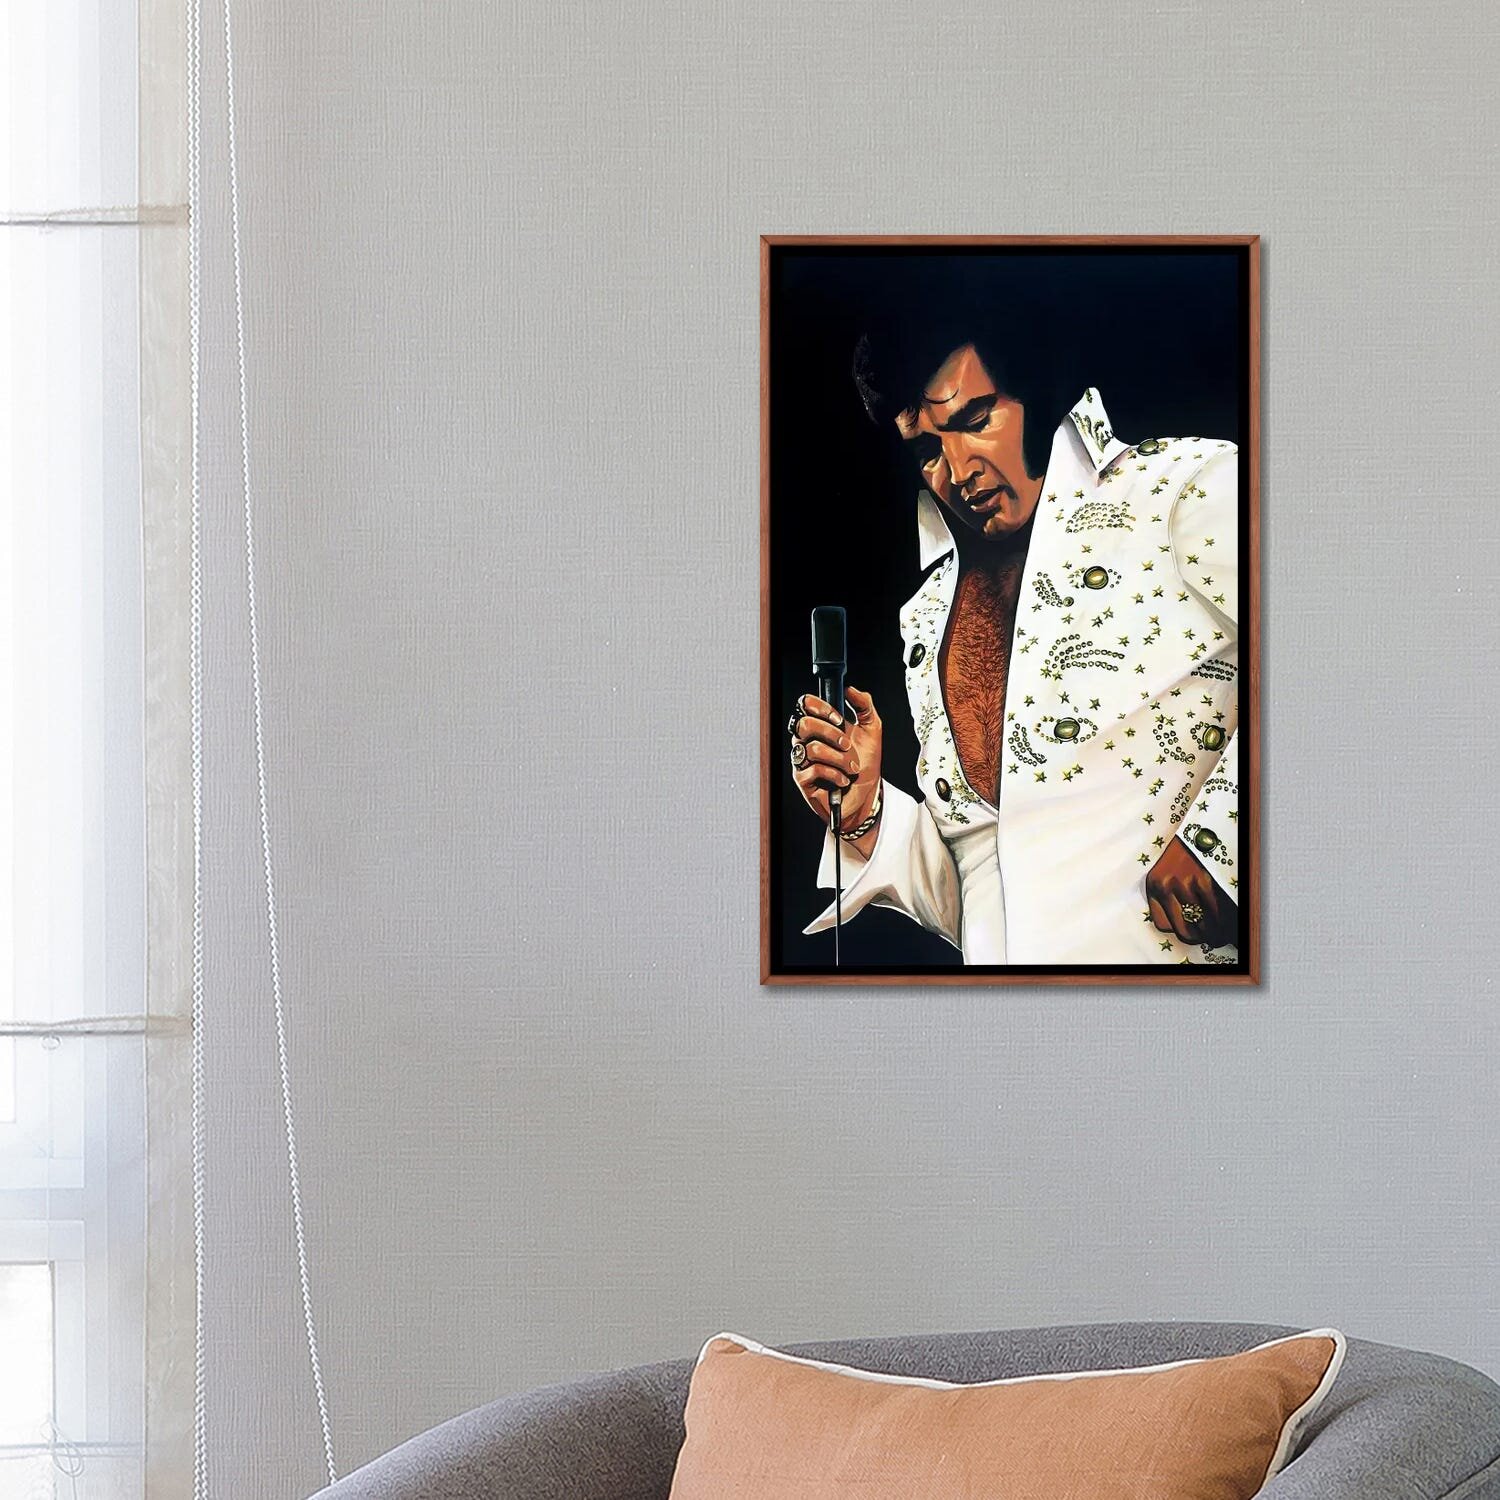 ELVIS PRESLEY EVERYTHING YOU DO PHOTO PRINT ON WOOD FRAMED CANVAS WALL ART 